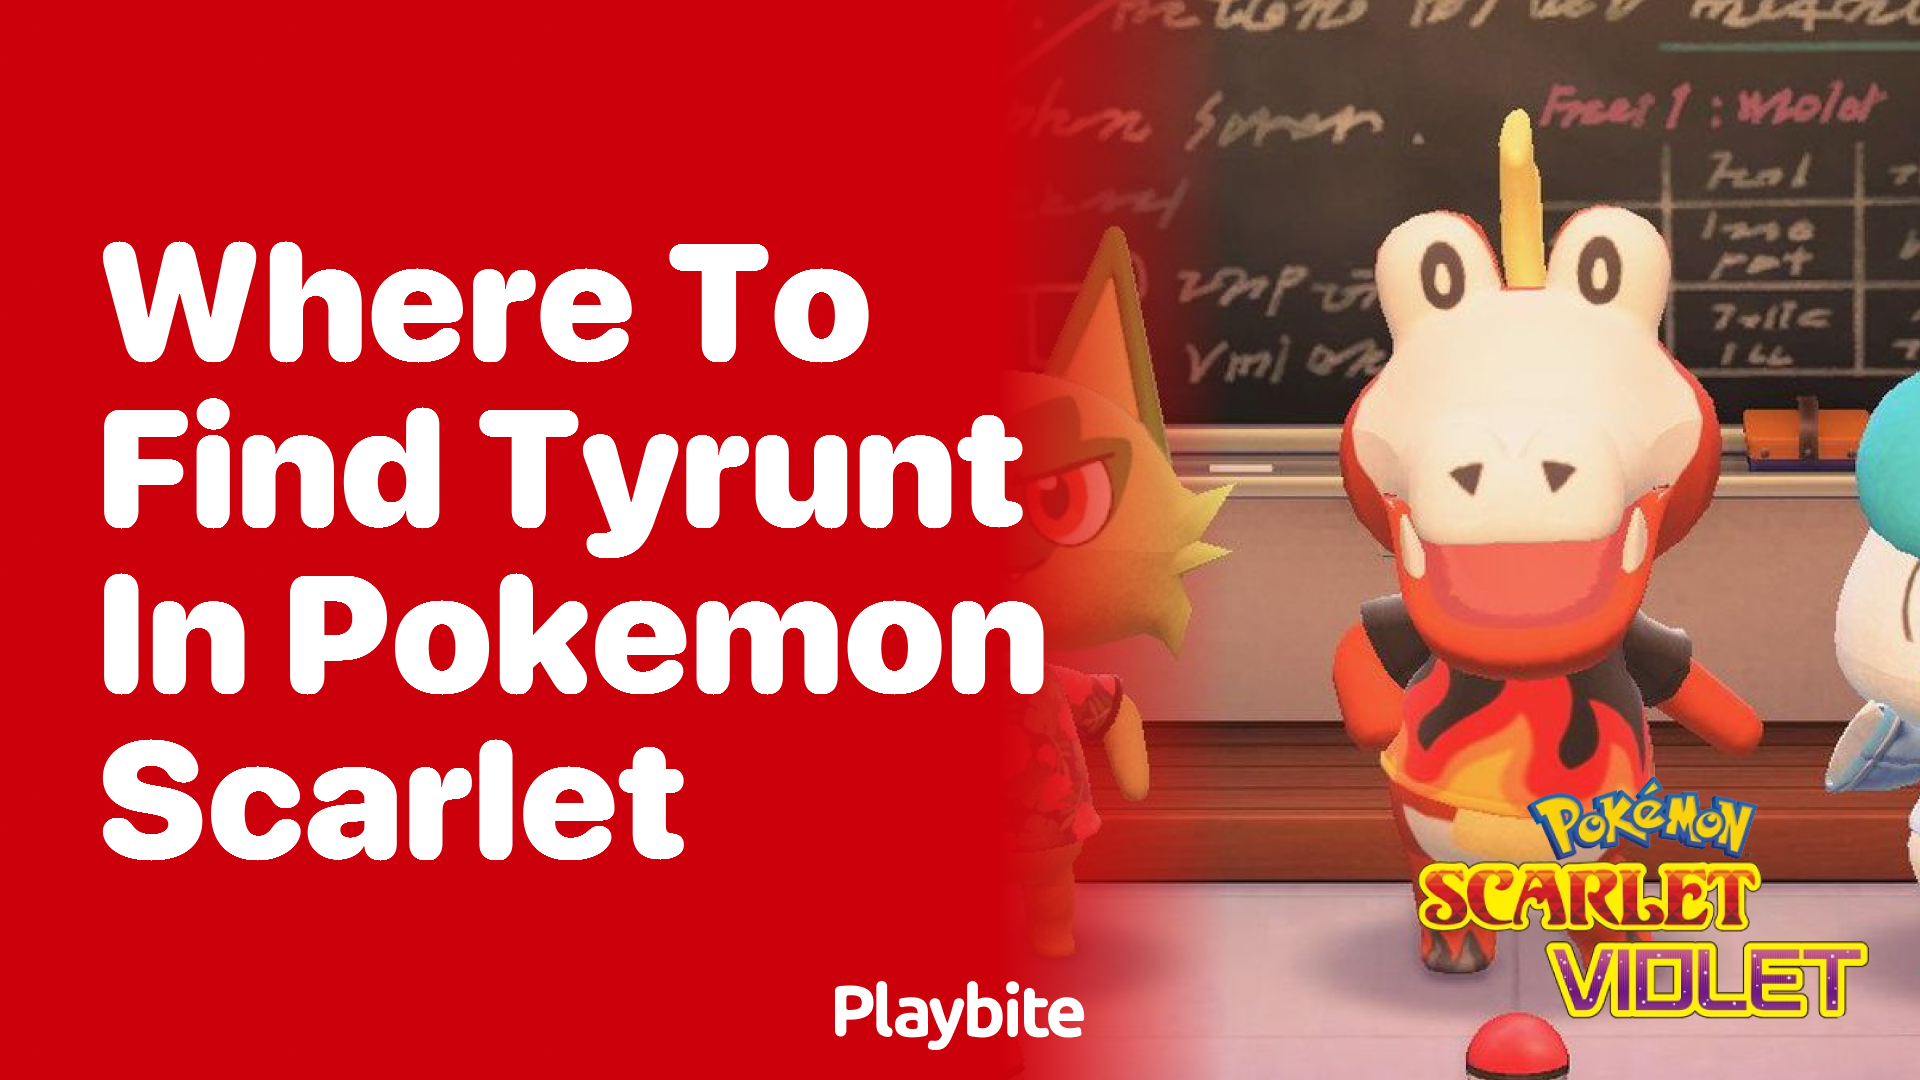 Where can I find Tyrunt in Pokemon Scarlet?